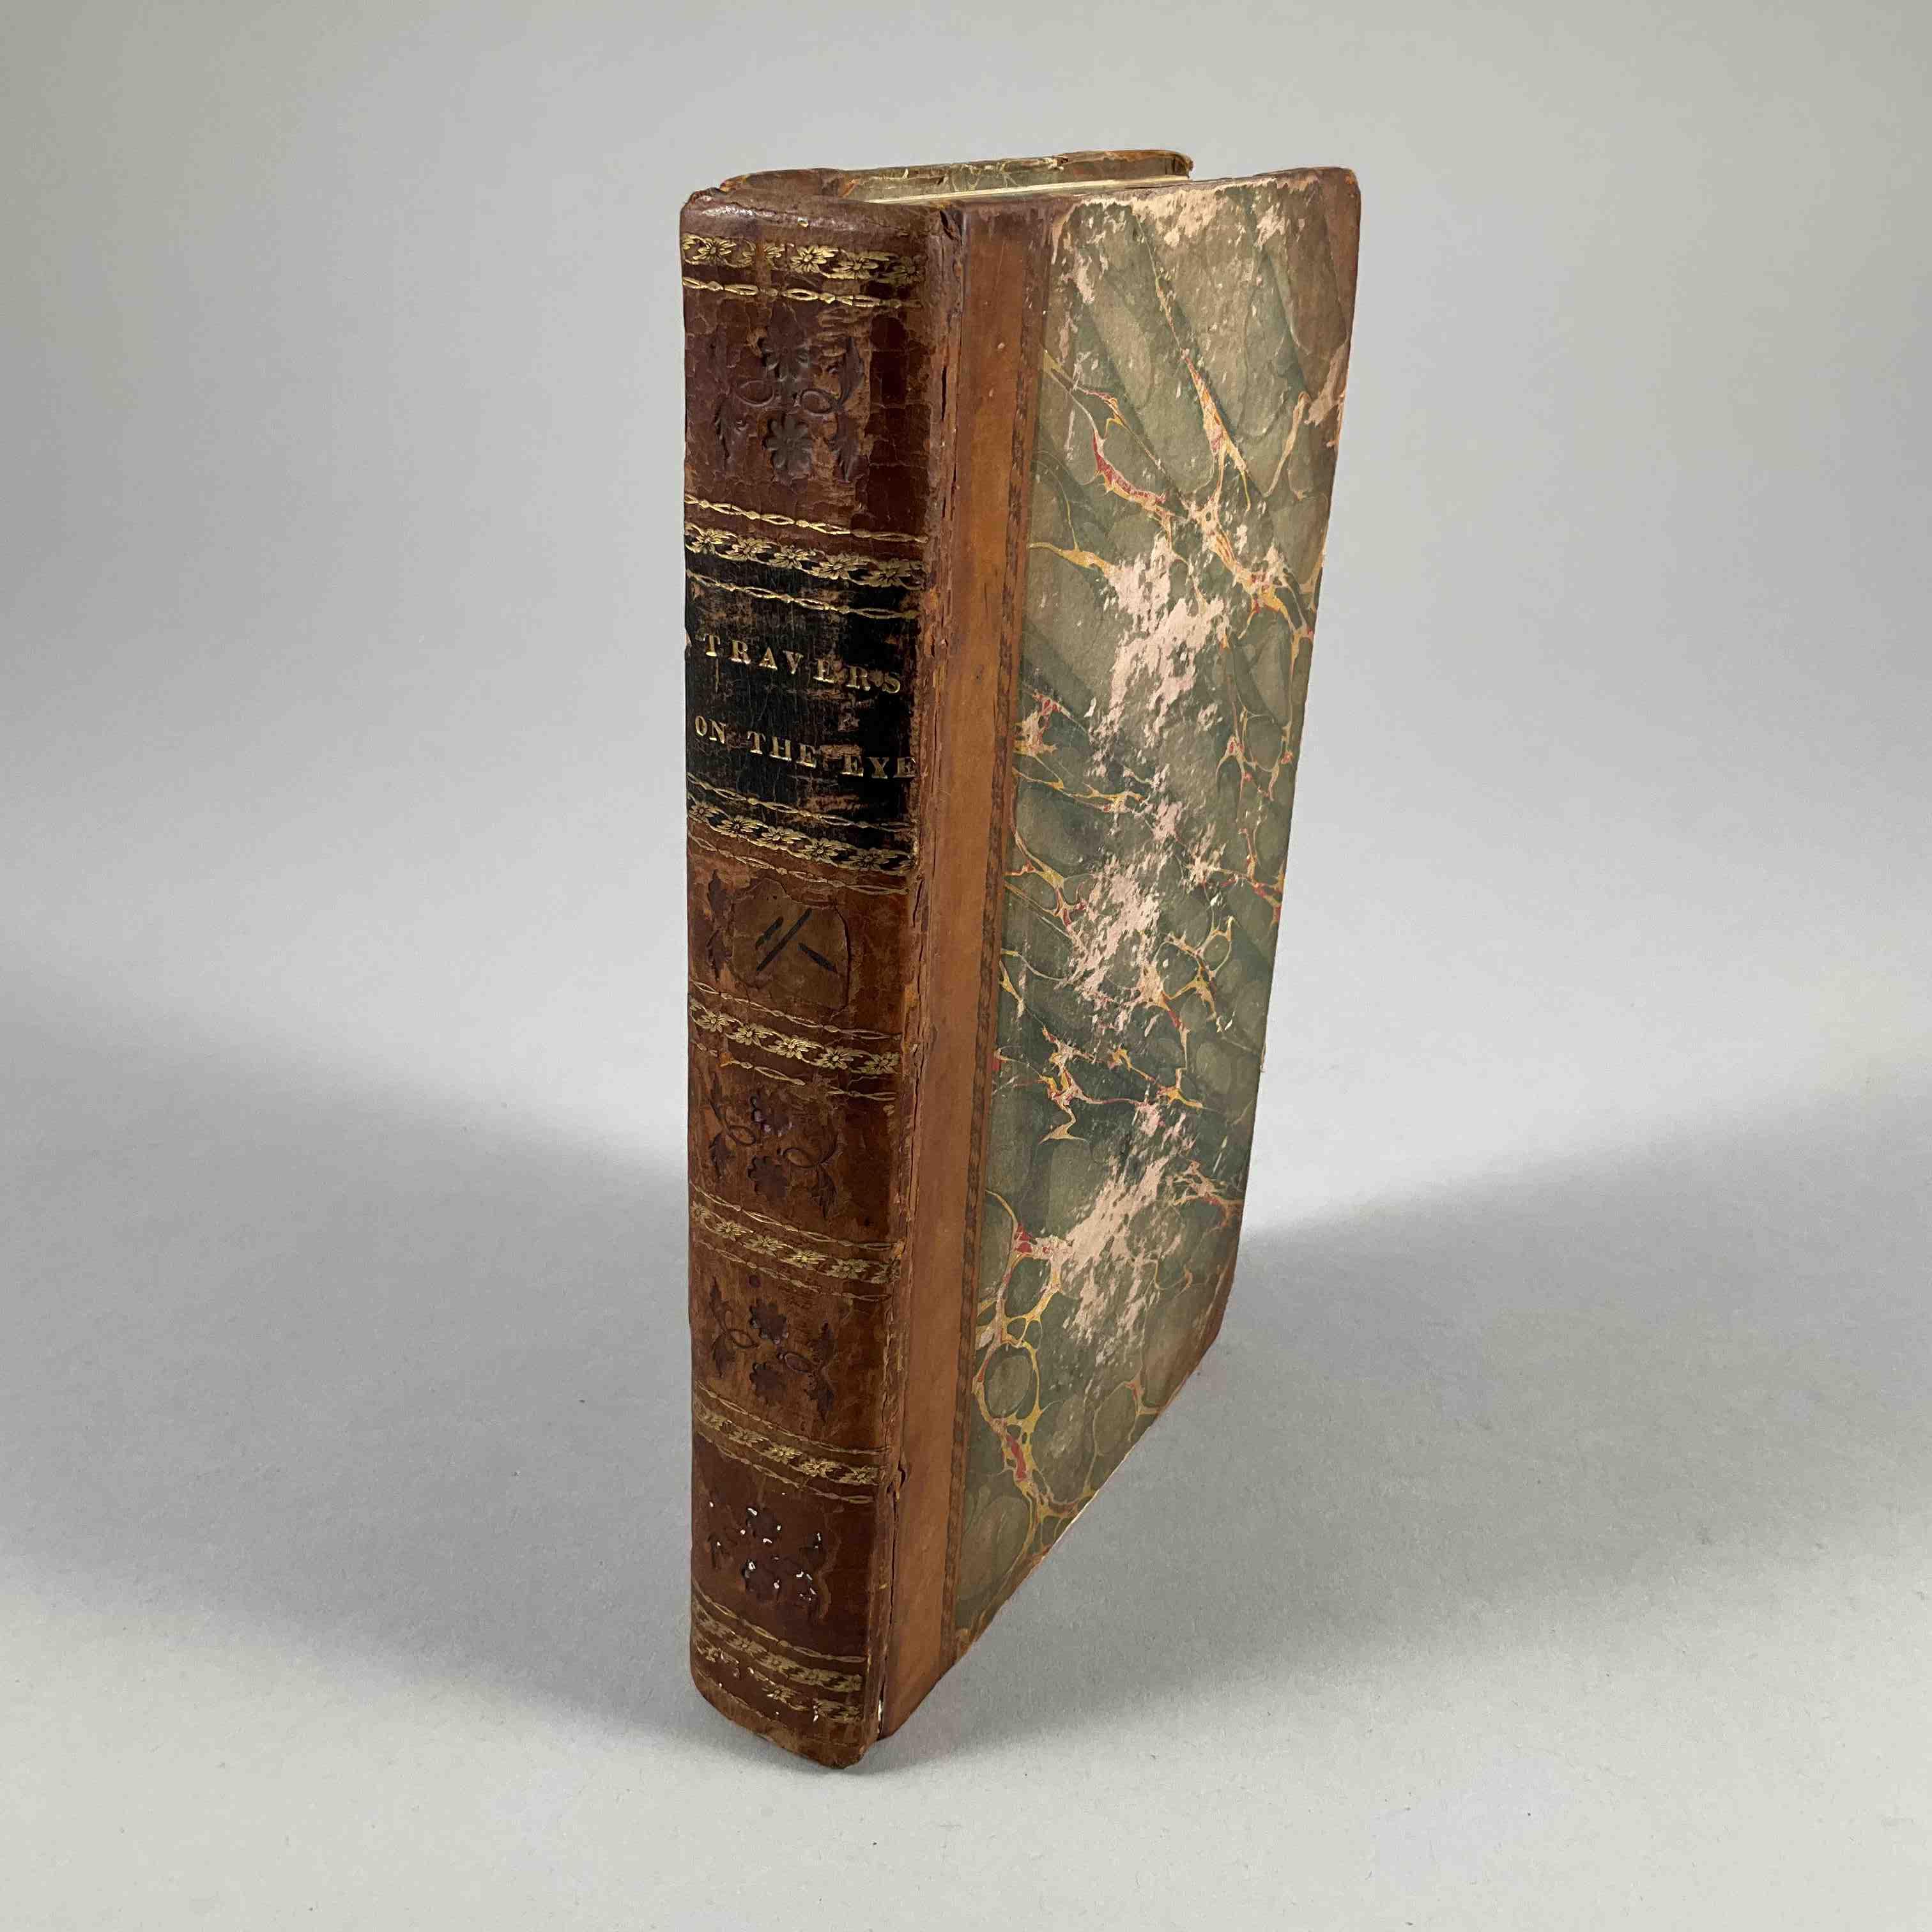 [Ophtalmologie] Benjamin Travers, A synopsis of the diseases of the...